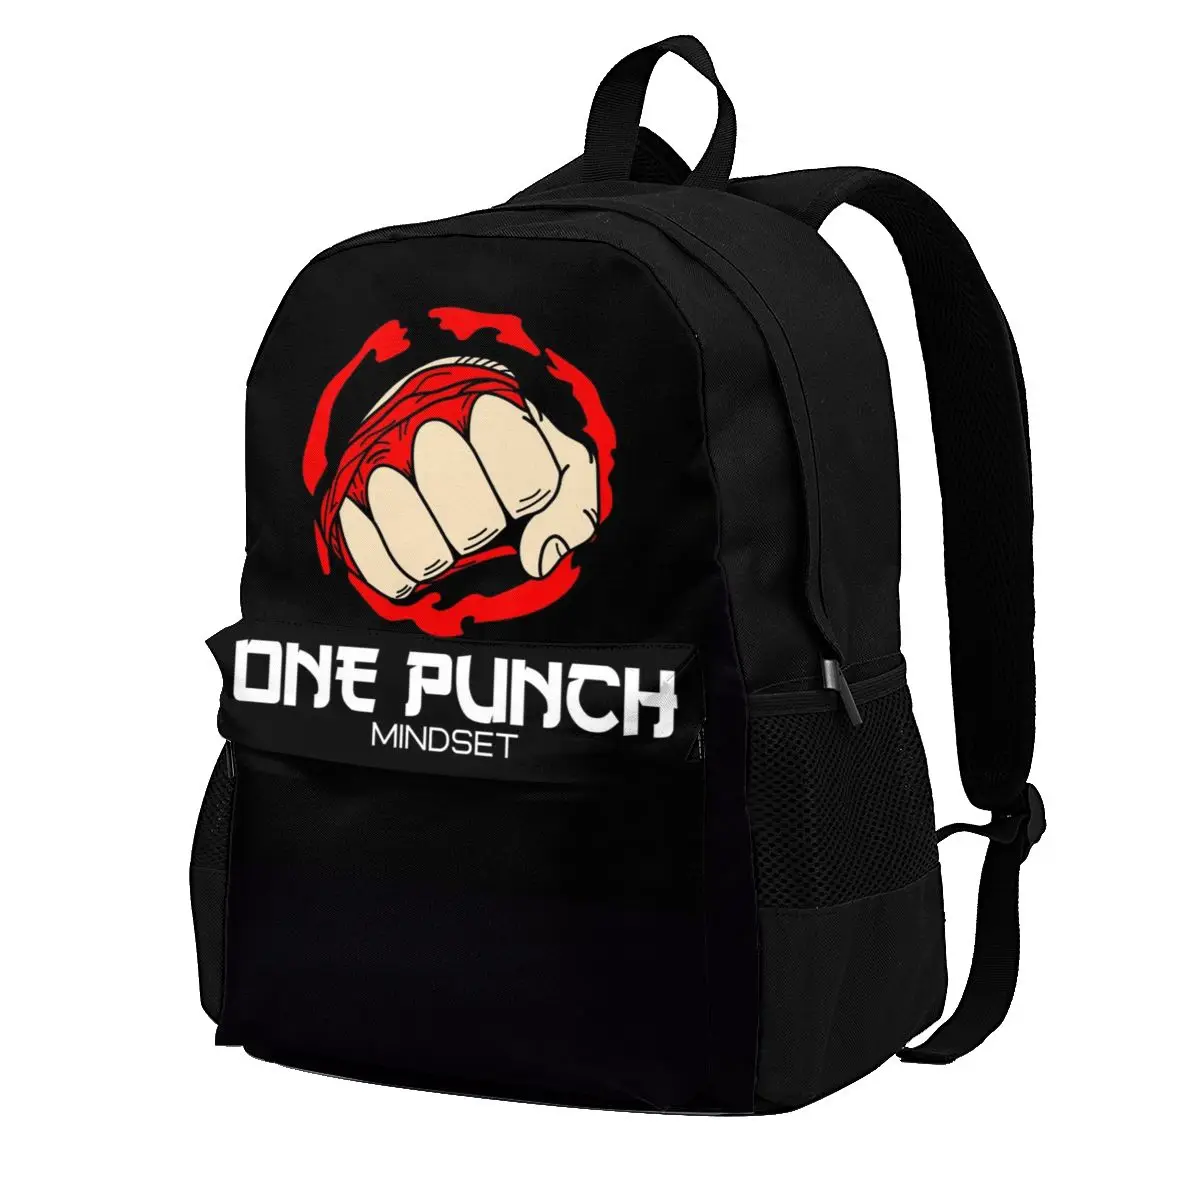 

One Punch Man Mindset Backpacks boxer red fist hand anime japan Charm Polyester Business Backpack Woman Durable Bags